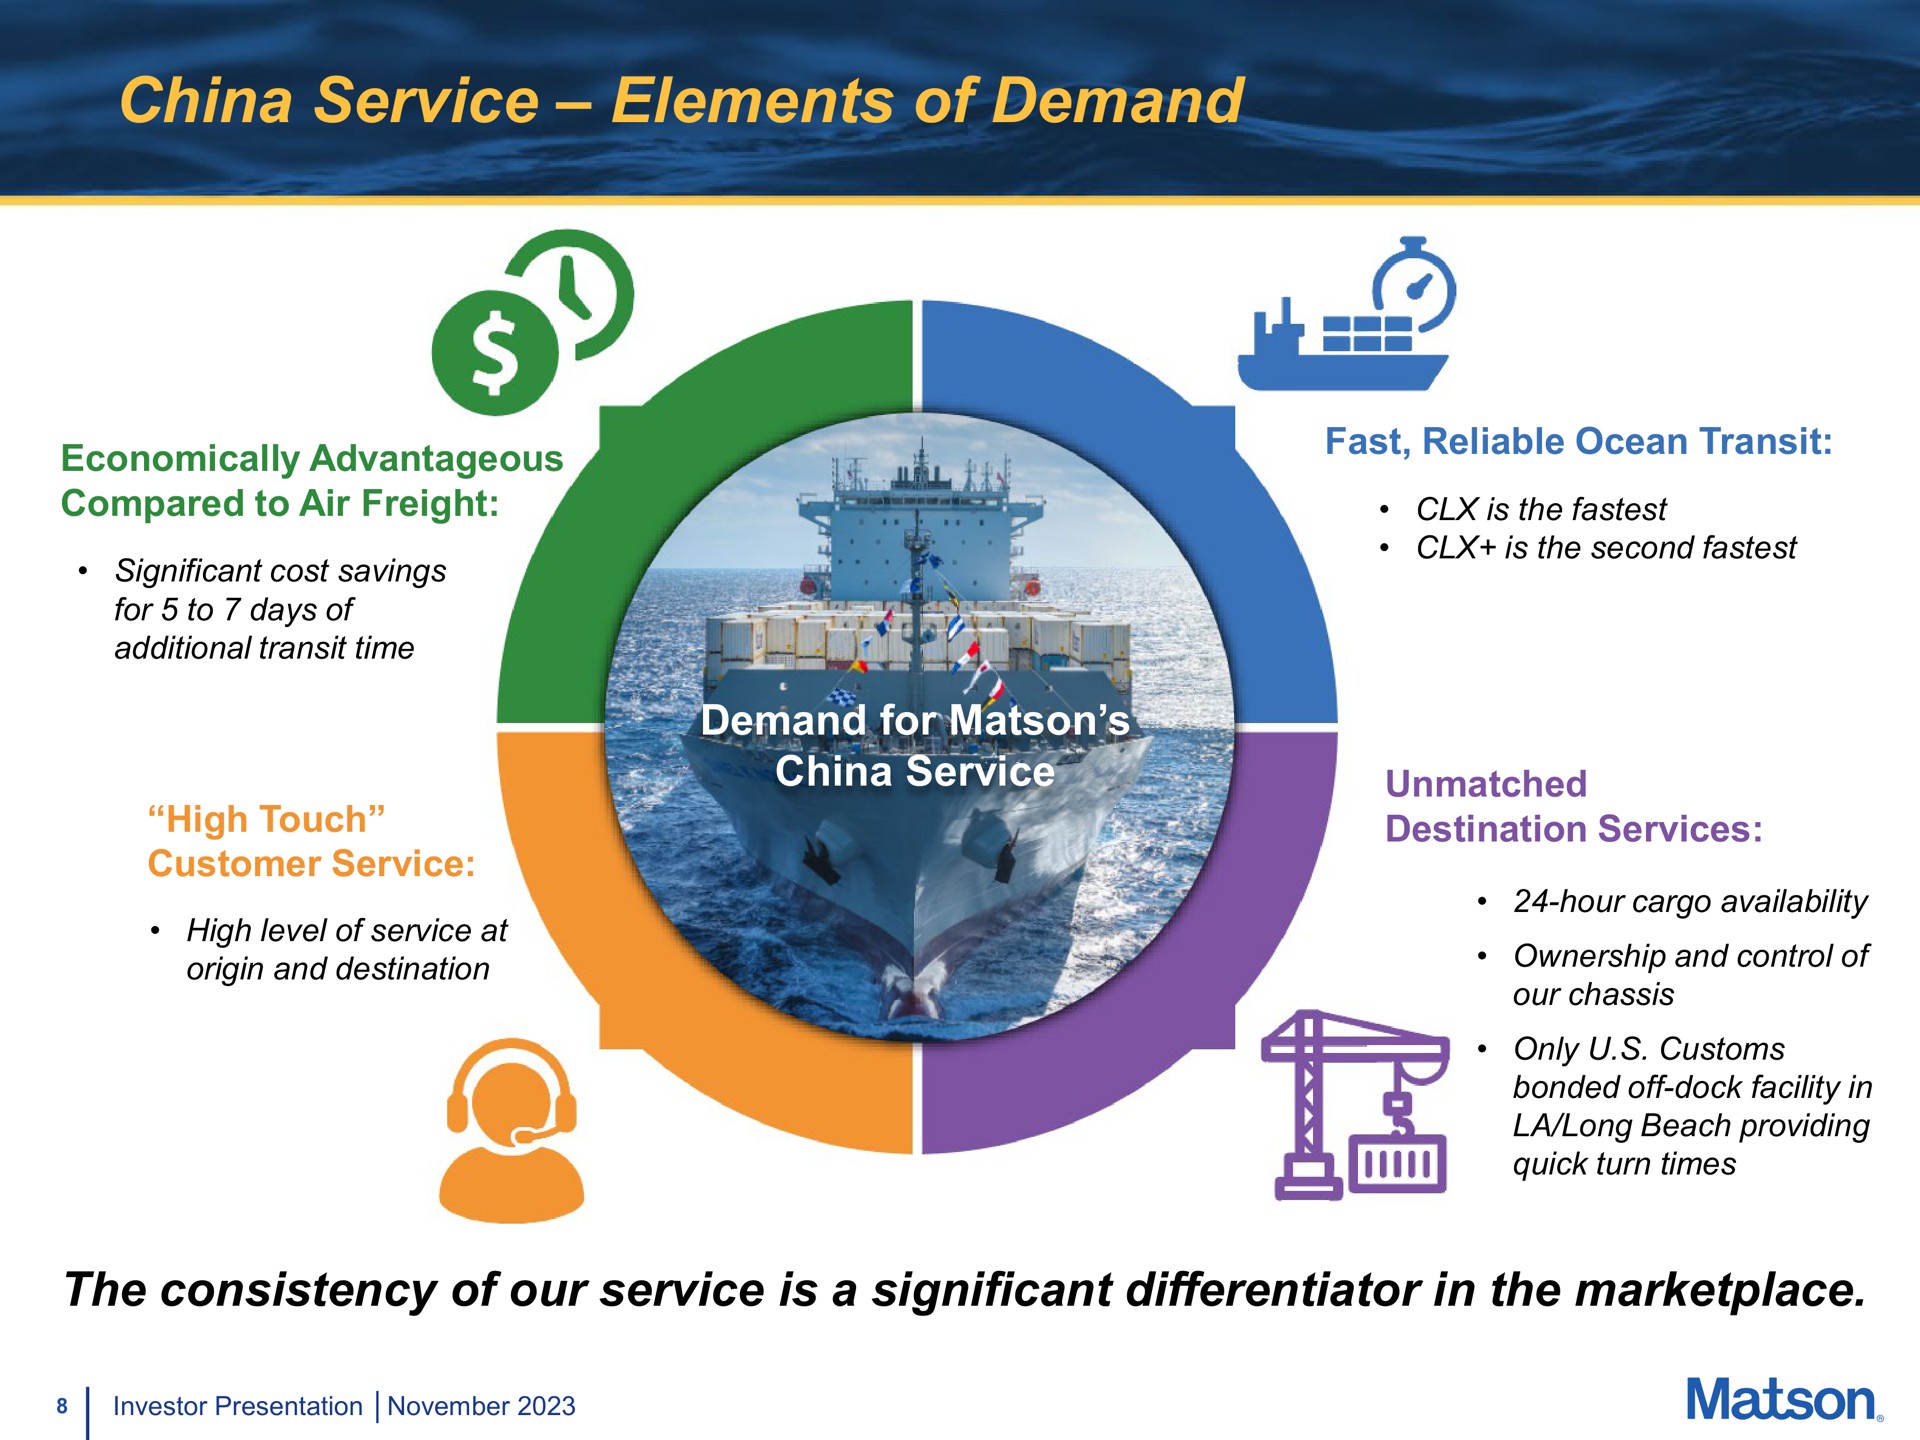 china service elements of demand economically advantageous compared to air freight high touch customer service demand for china service fast reliable ocean transit unmatched destination services the consistency of our service is a significant differentiator in the origin and ownership and control | Matson